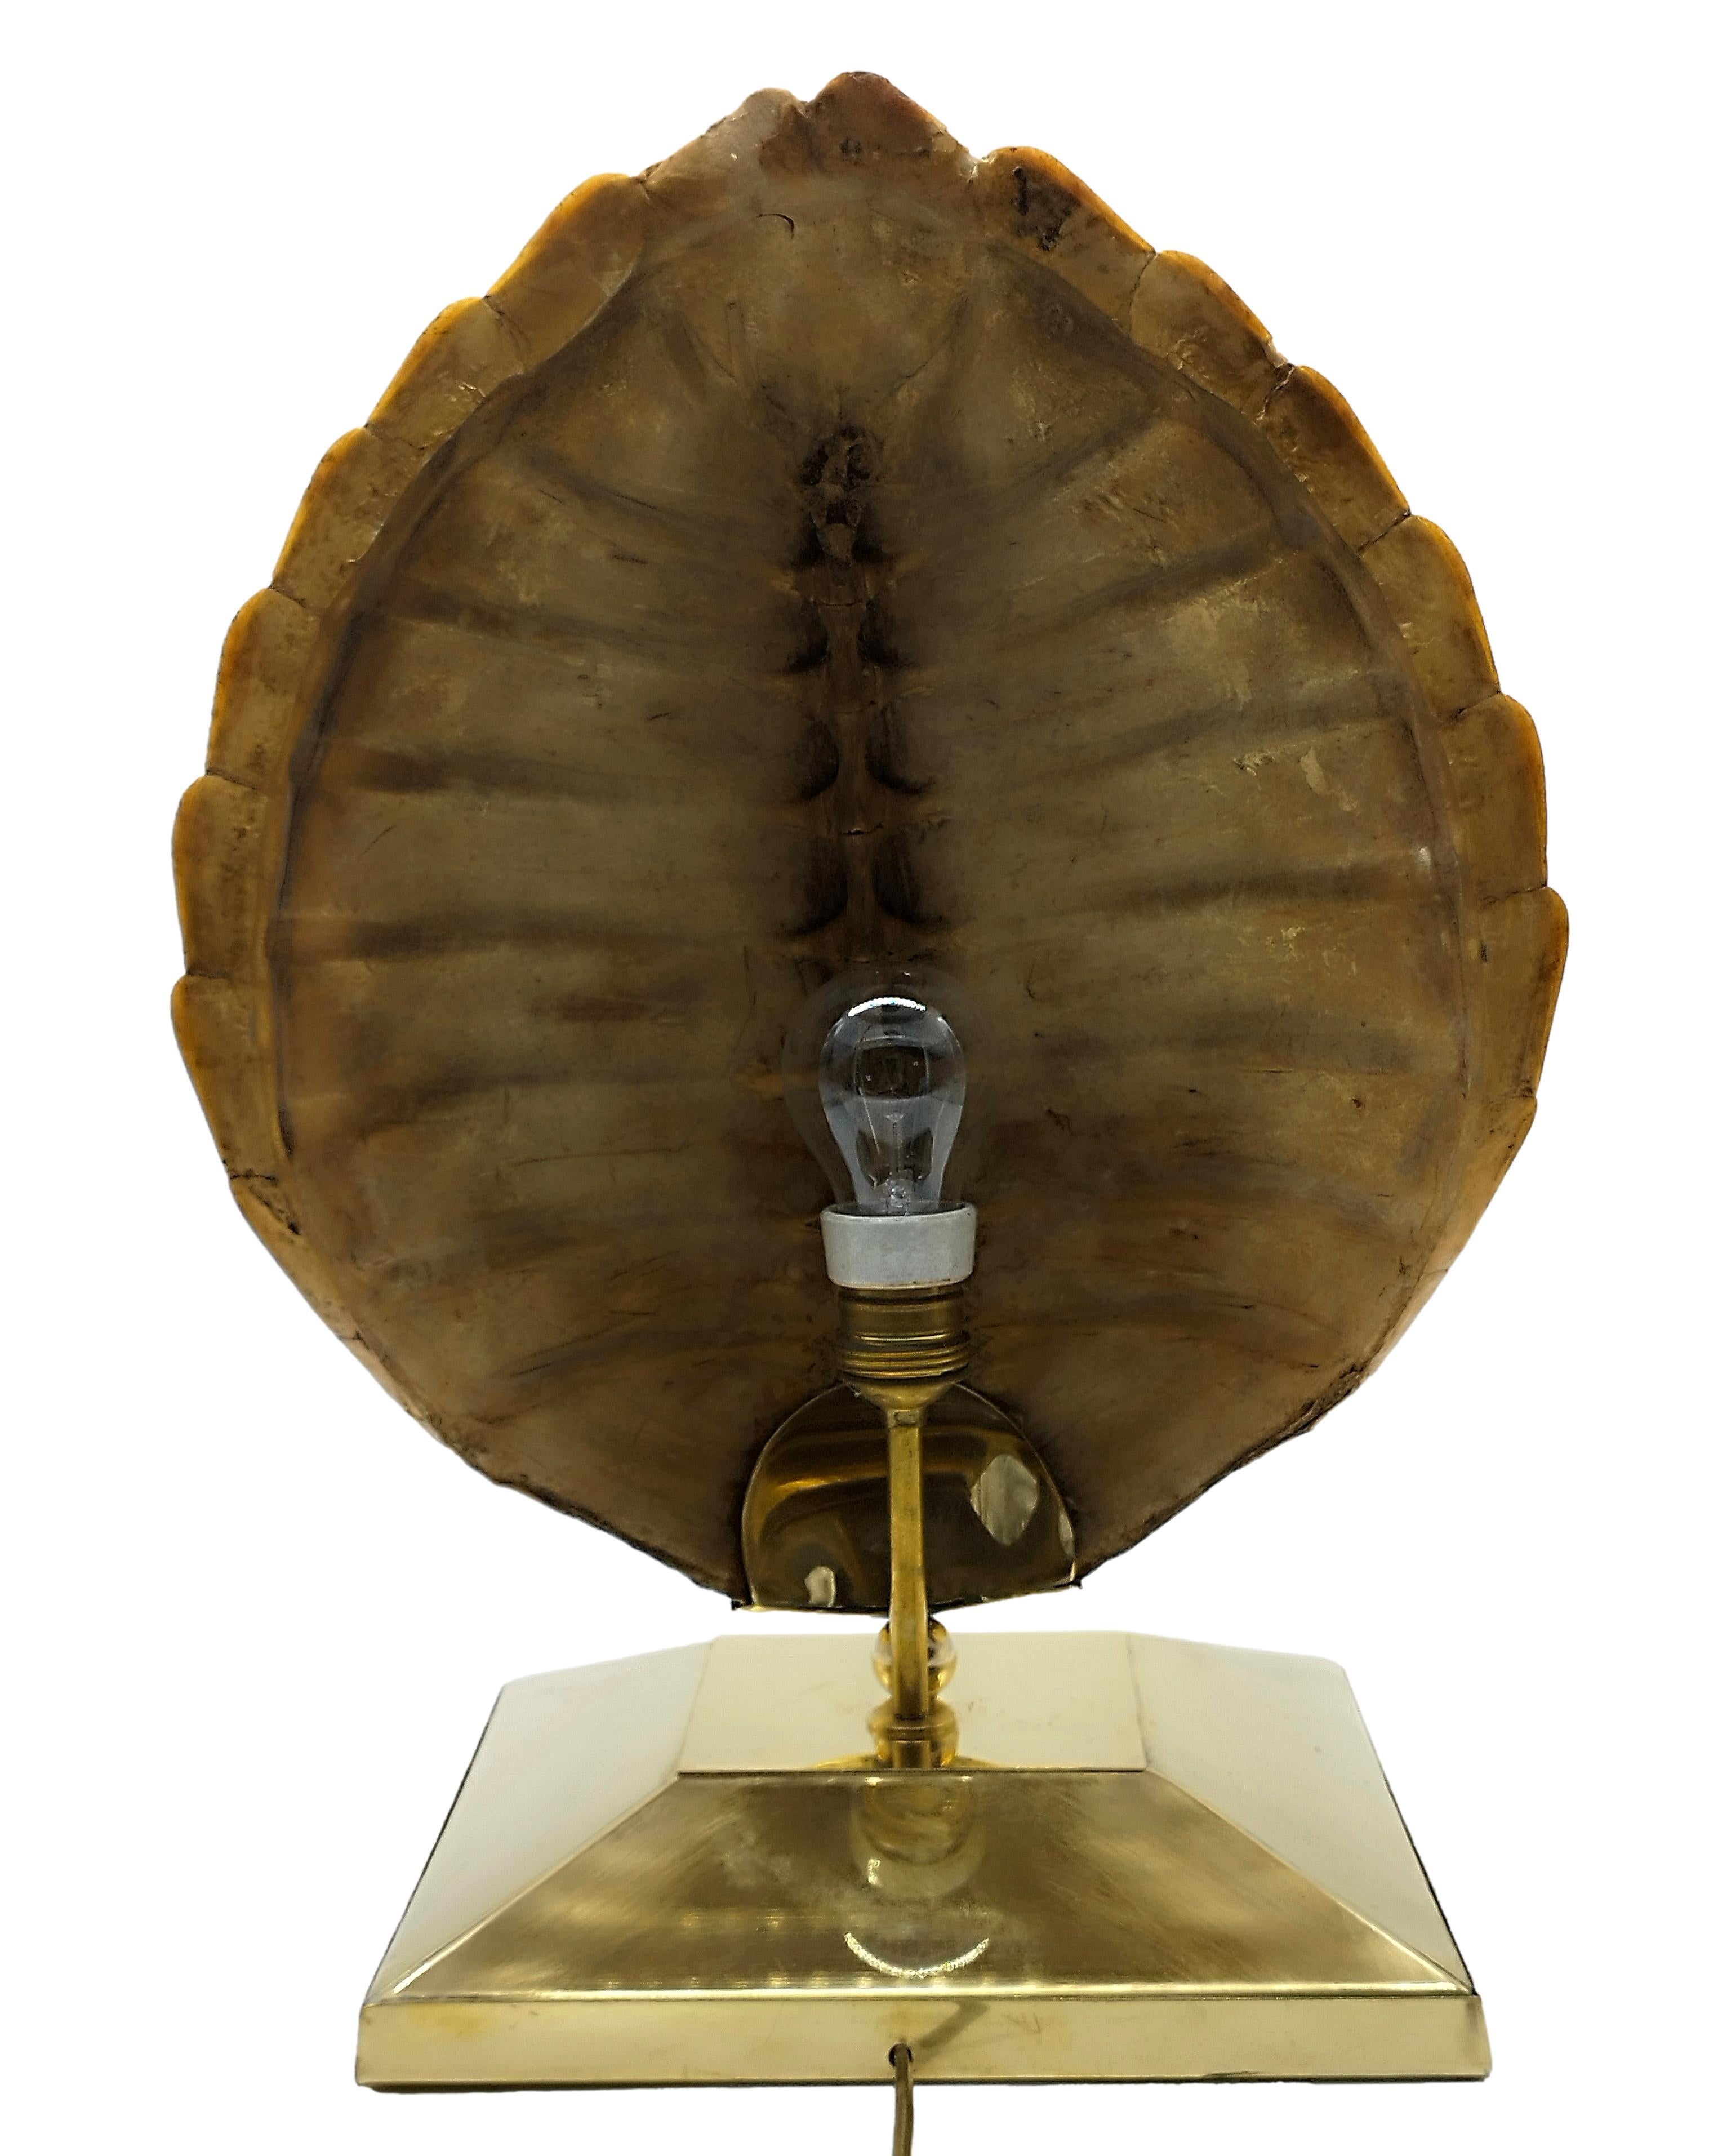 Tortoiseshell table lamp with brass  base, circa 1970s, highly decorative, in the Maison Jansen style.